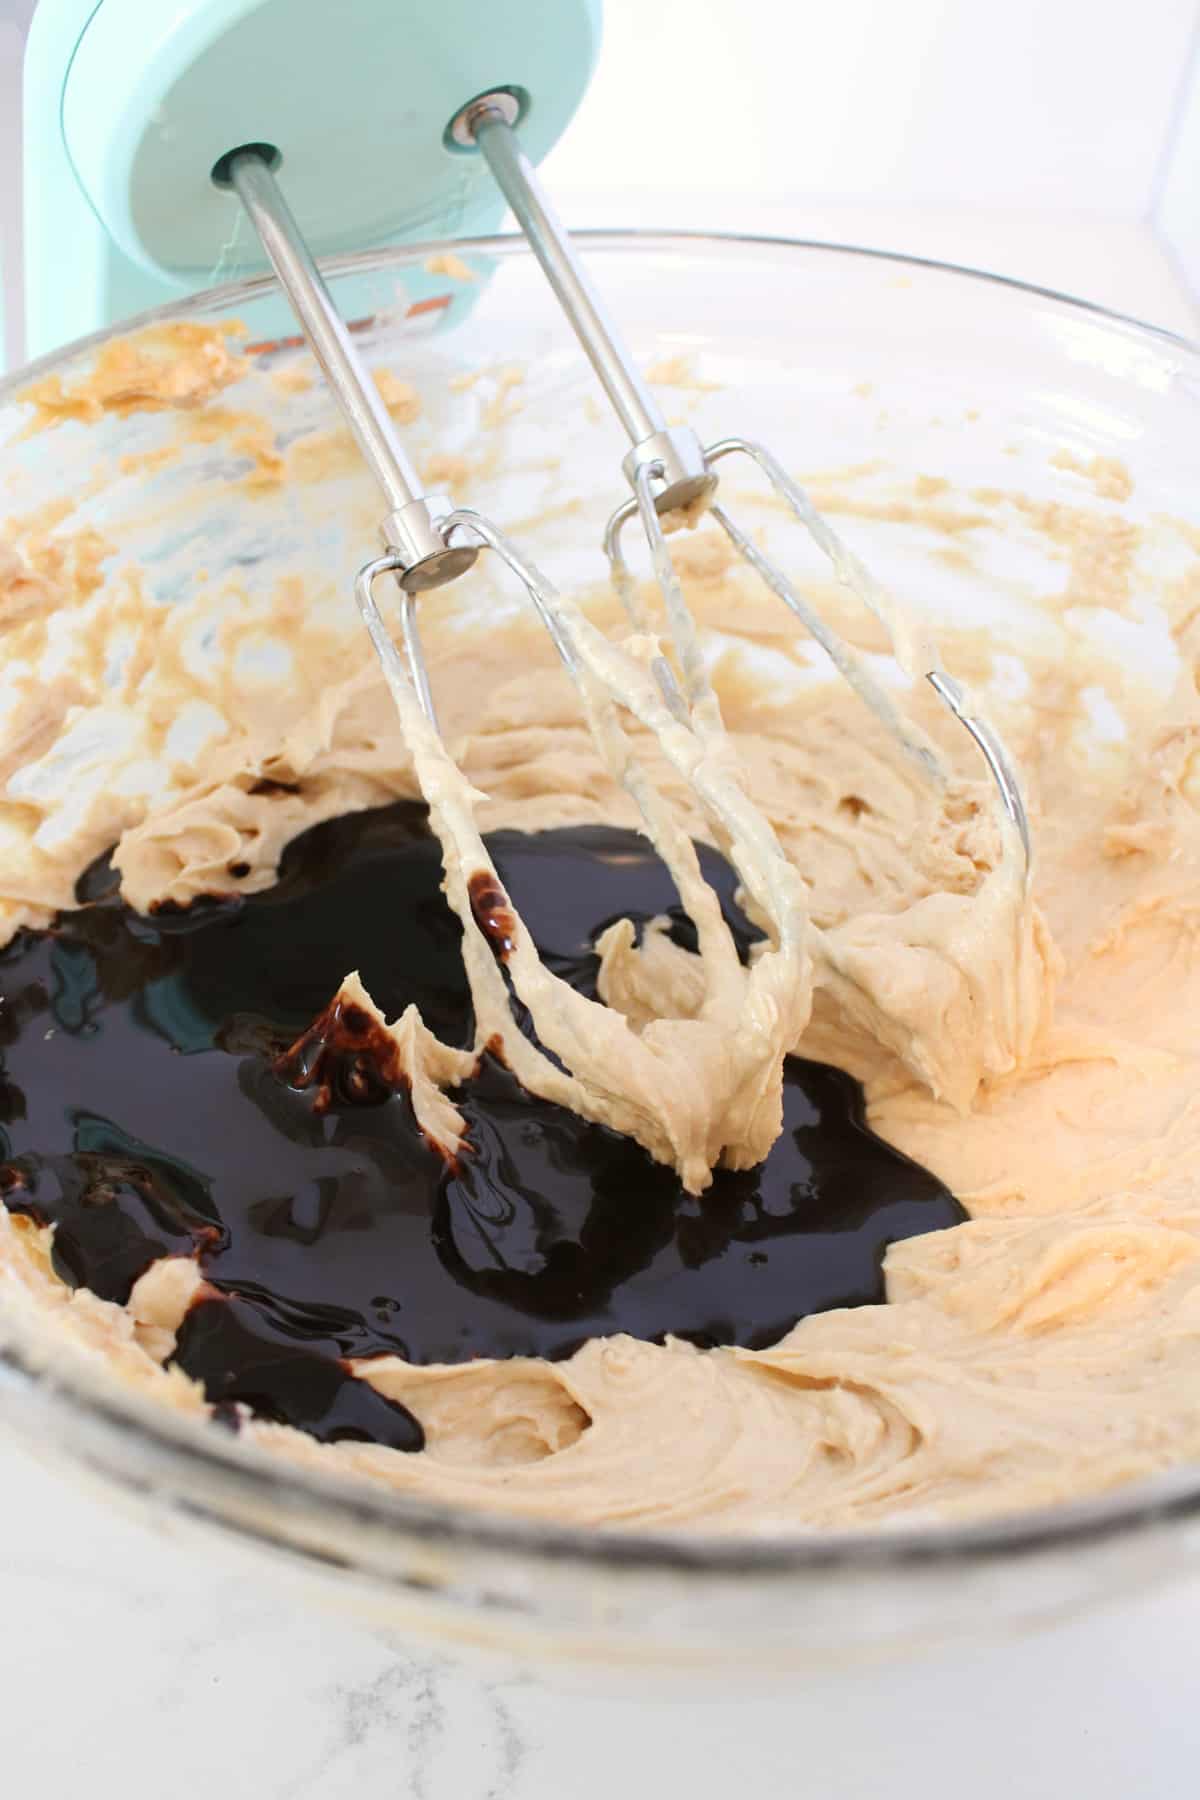 Mixing pie ingredients with an electric mixer.